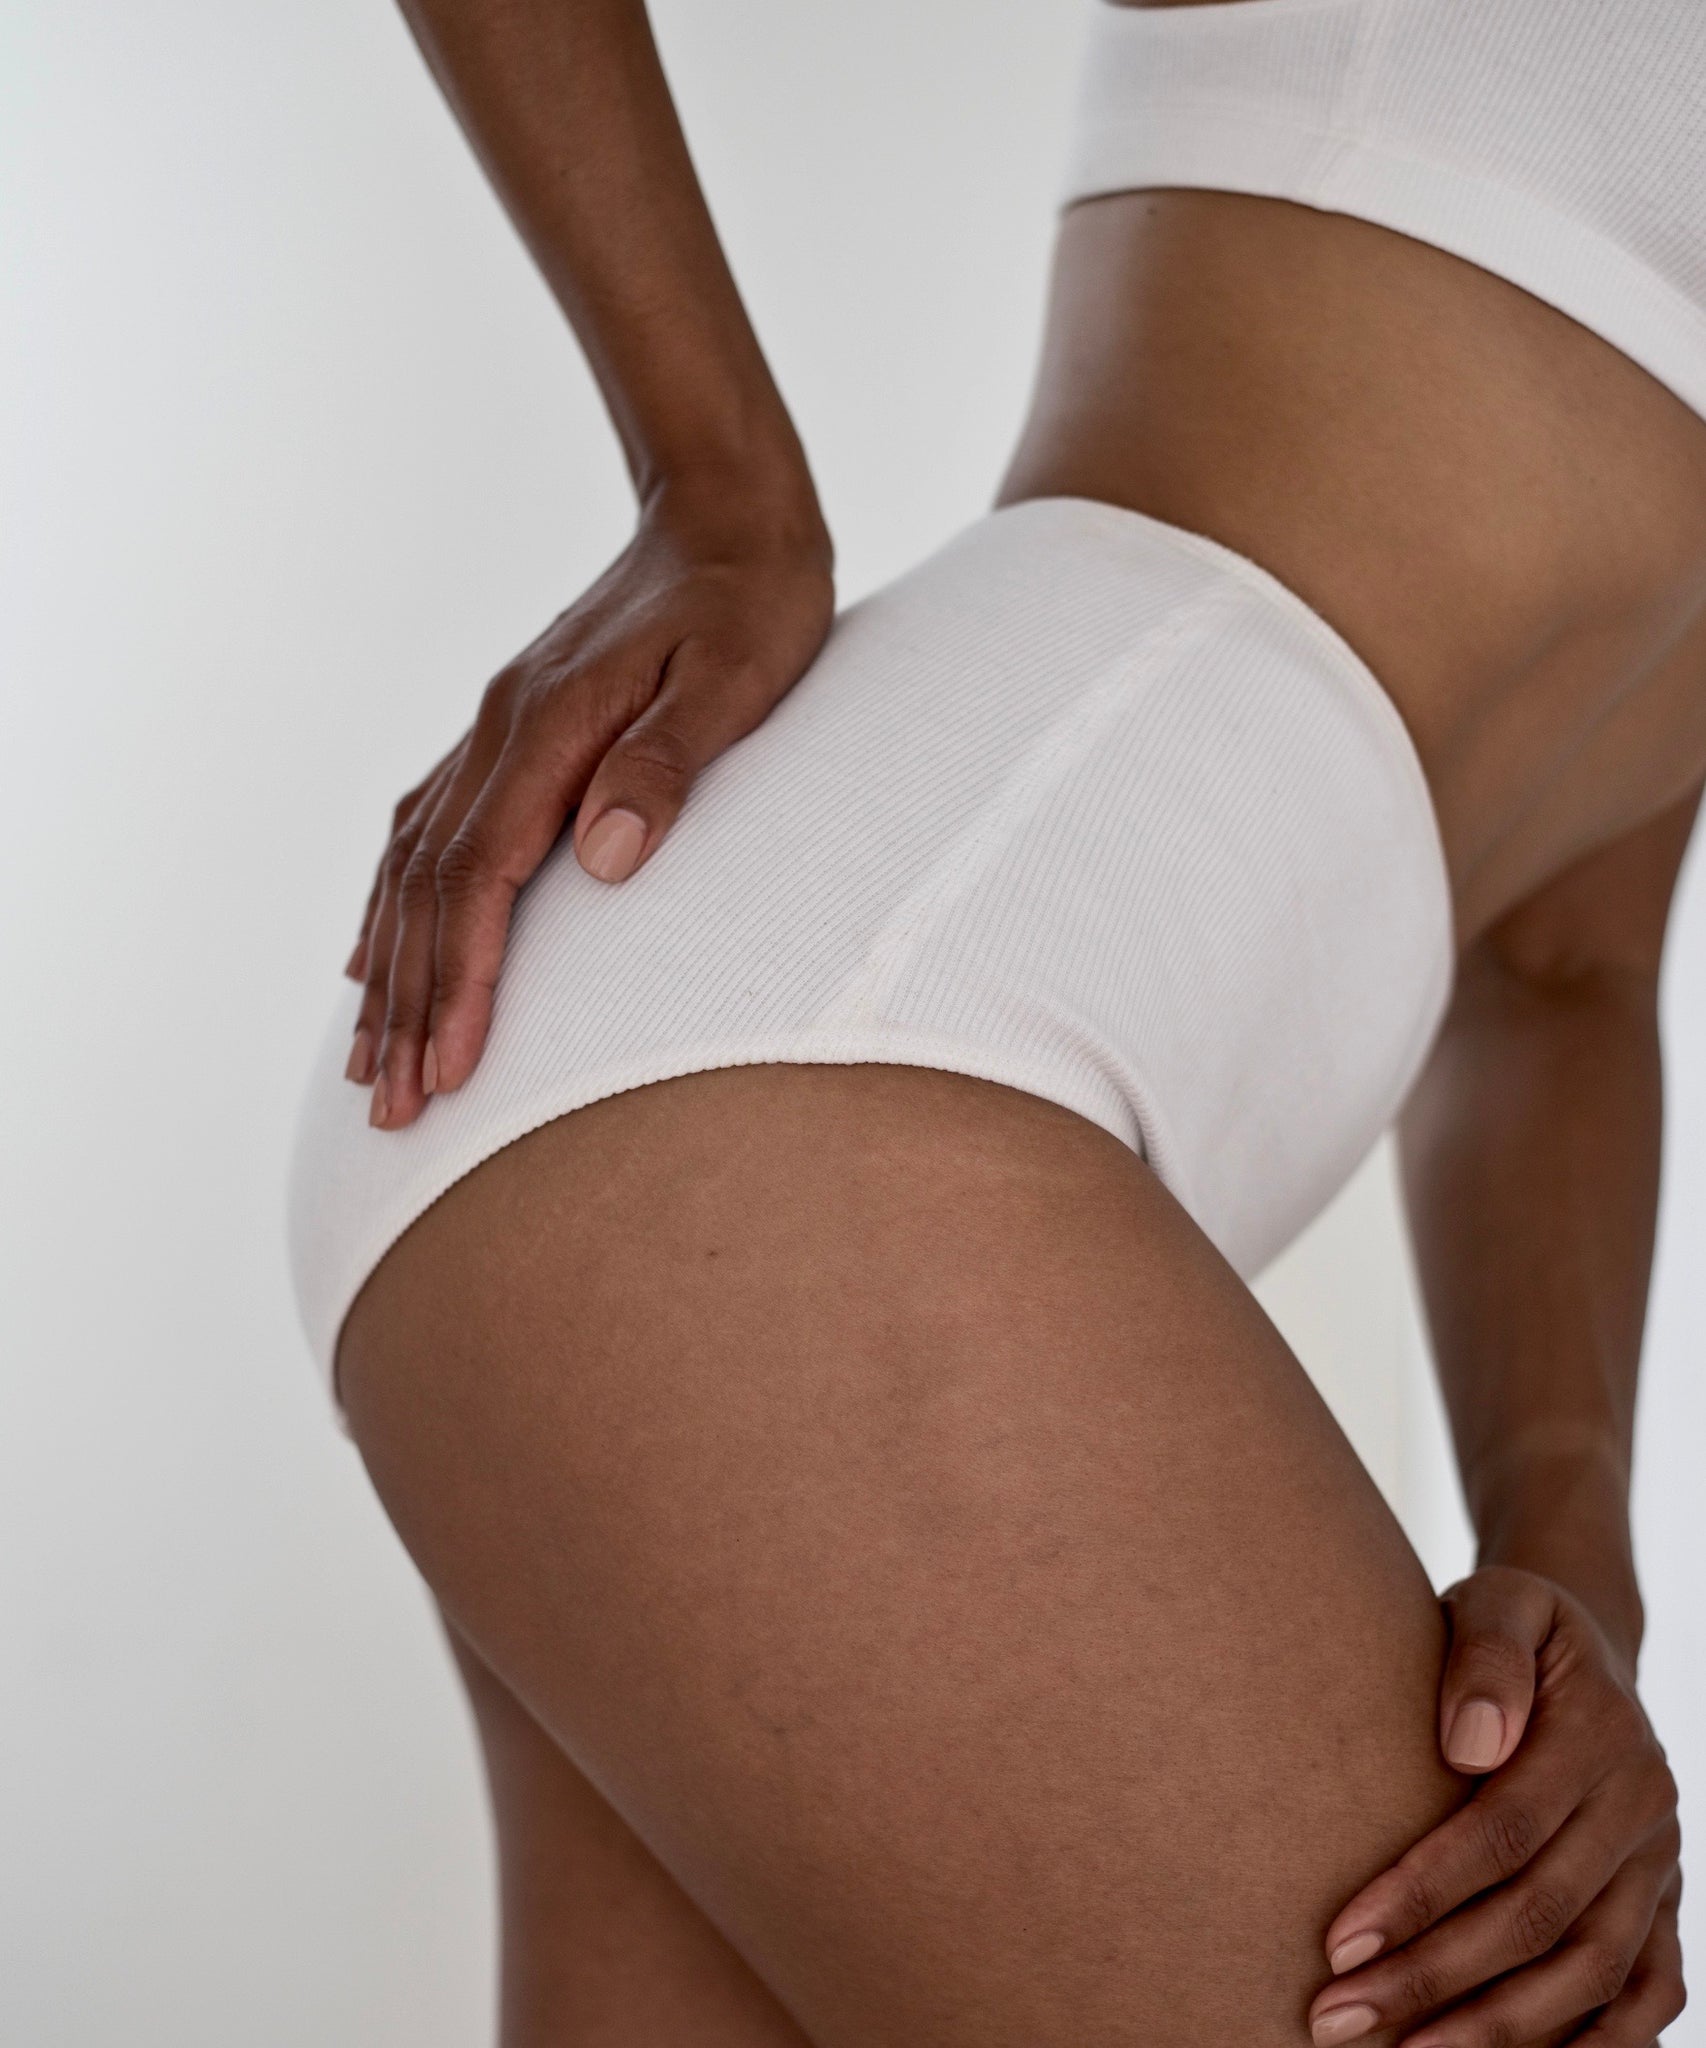 Organic Cotton Underwear: why should we care?